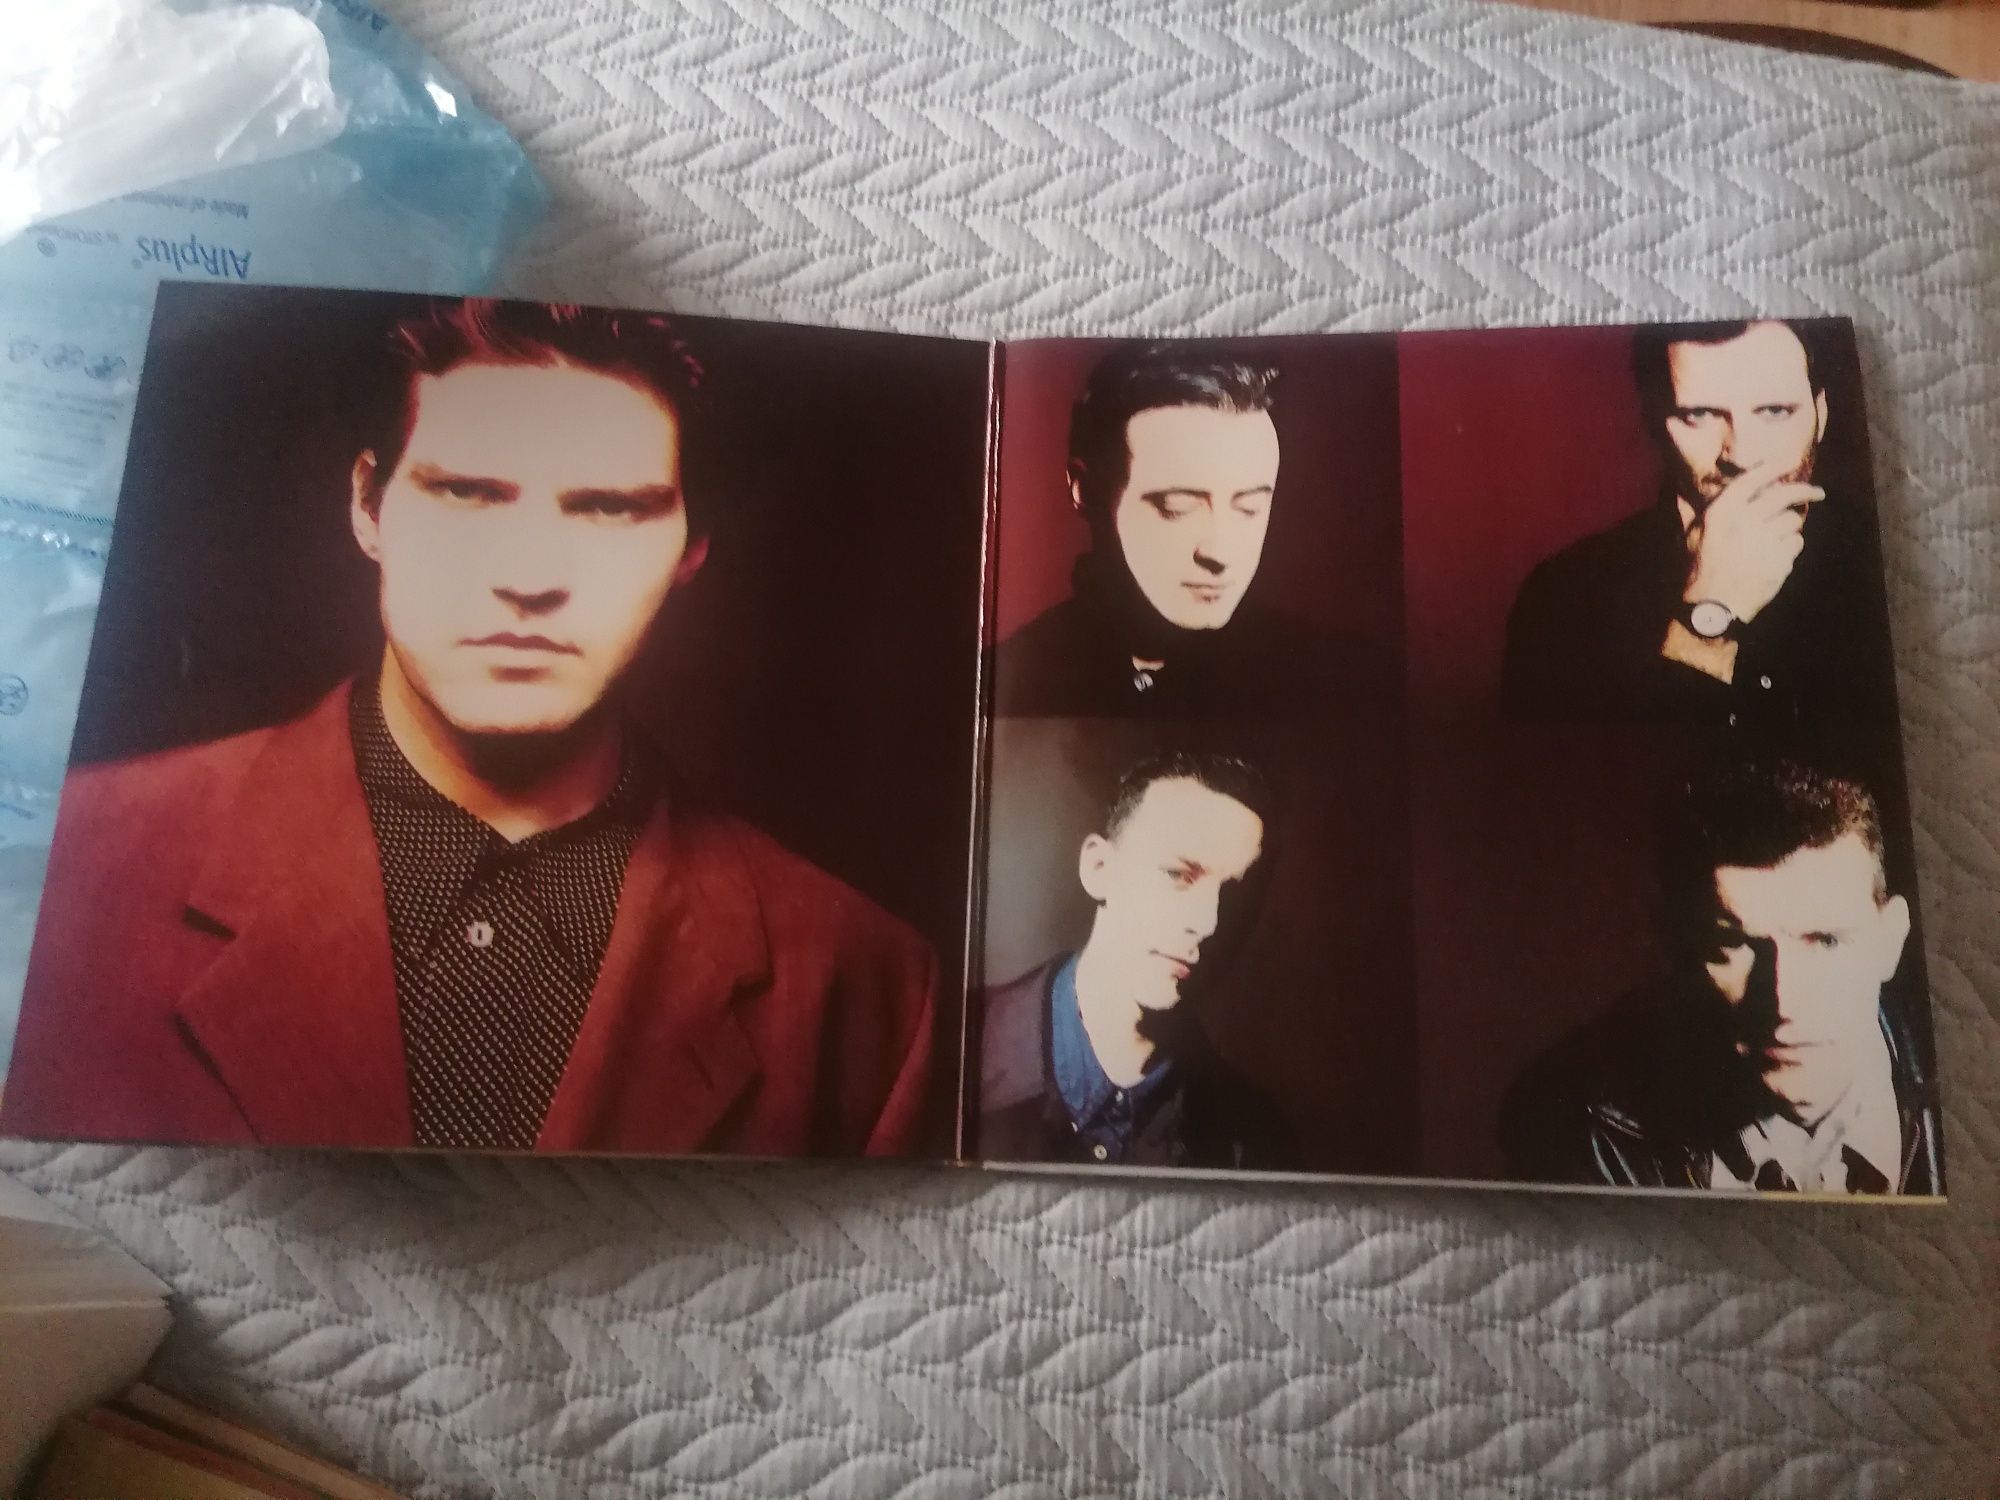 Lloyd Cole and the Commotions 1984/1989 LP